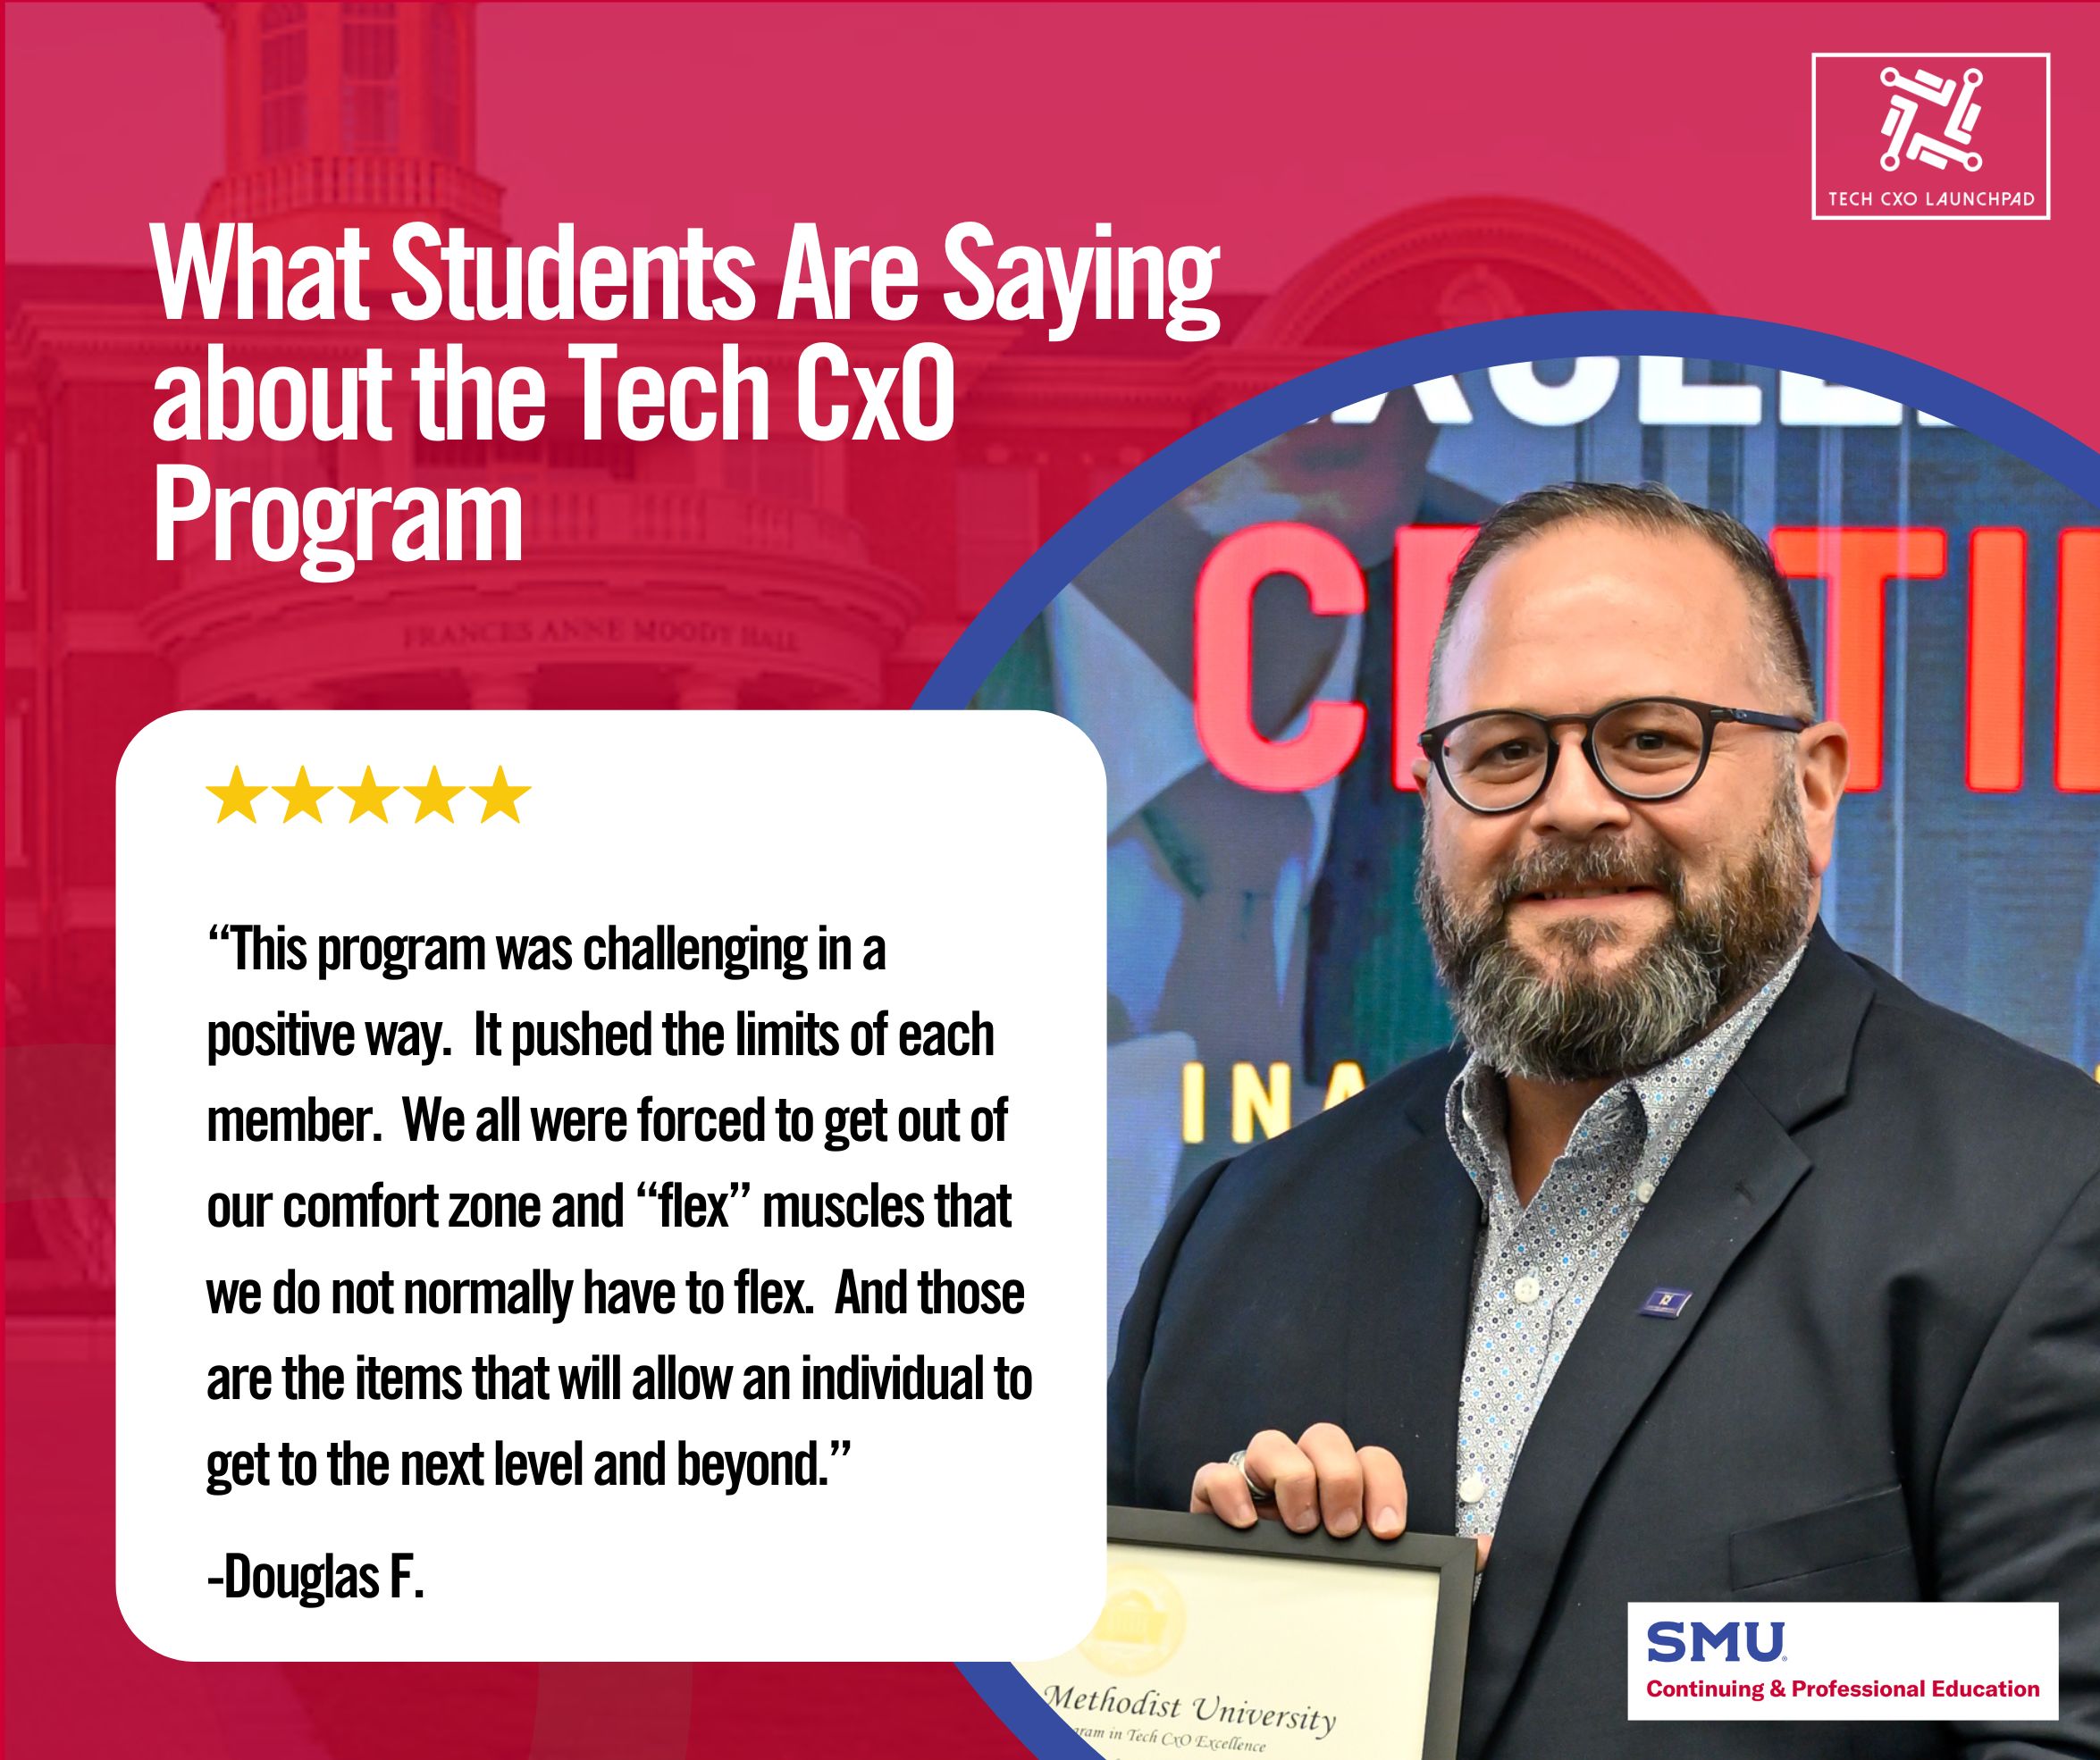 Graphic with quote from SMU Tech CxO student Douglas F.